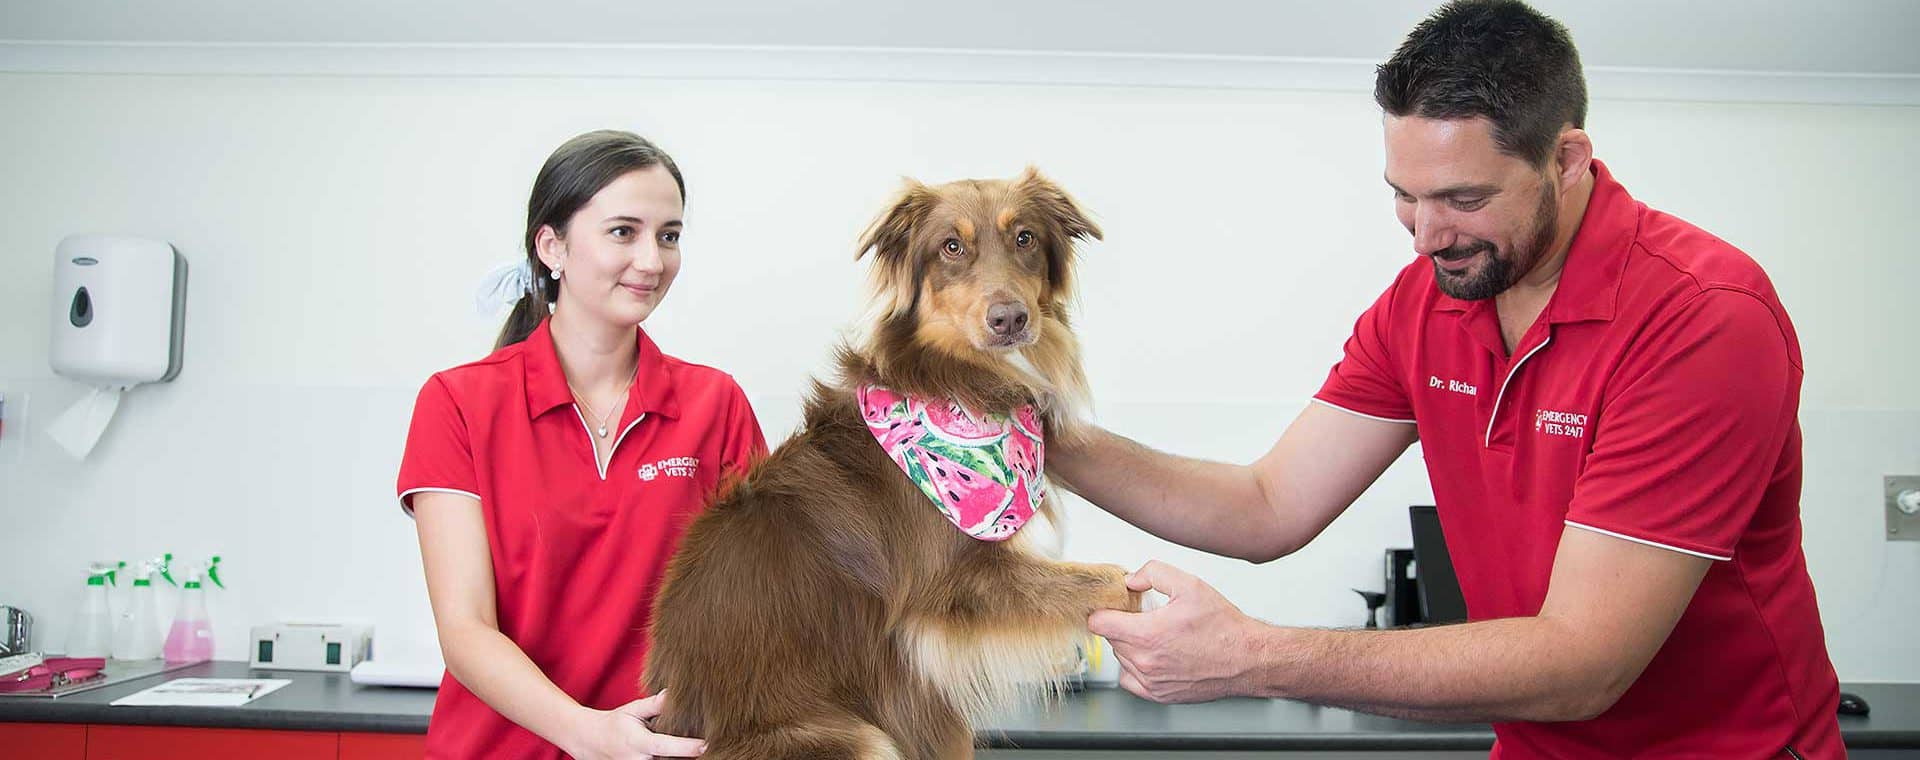 Cairns Emergency Vets - Access to Quality Care 24/7 - (07) 4015 3459